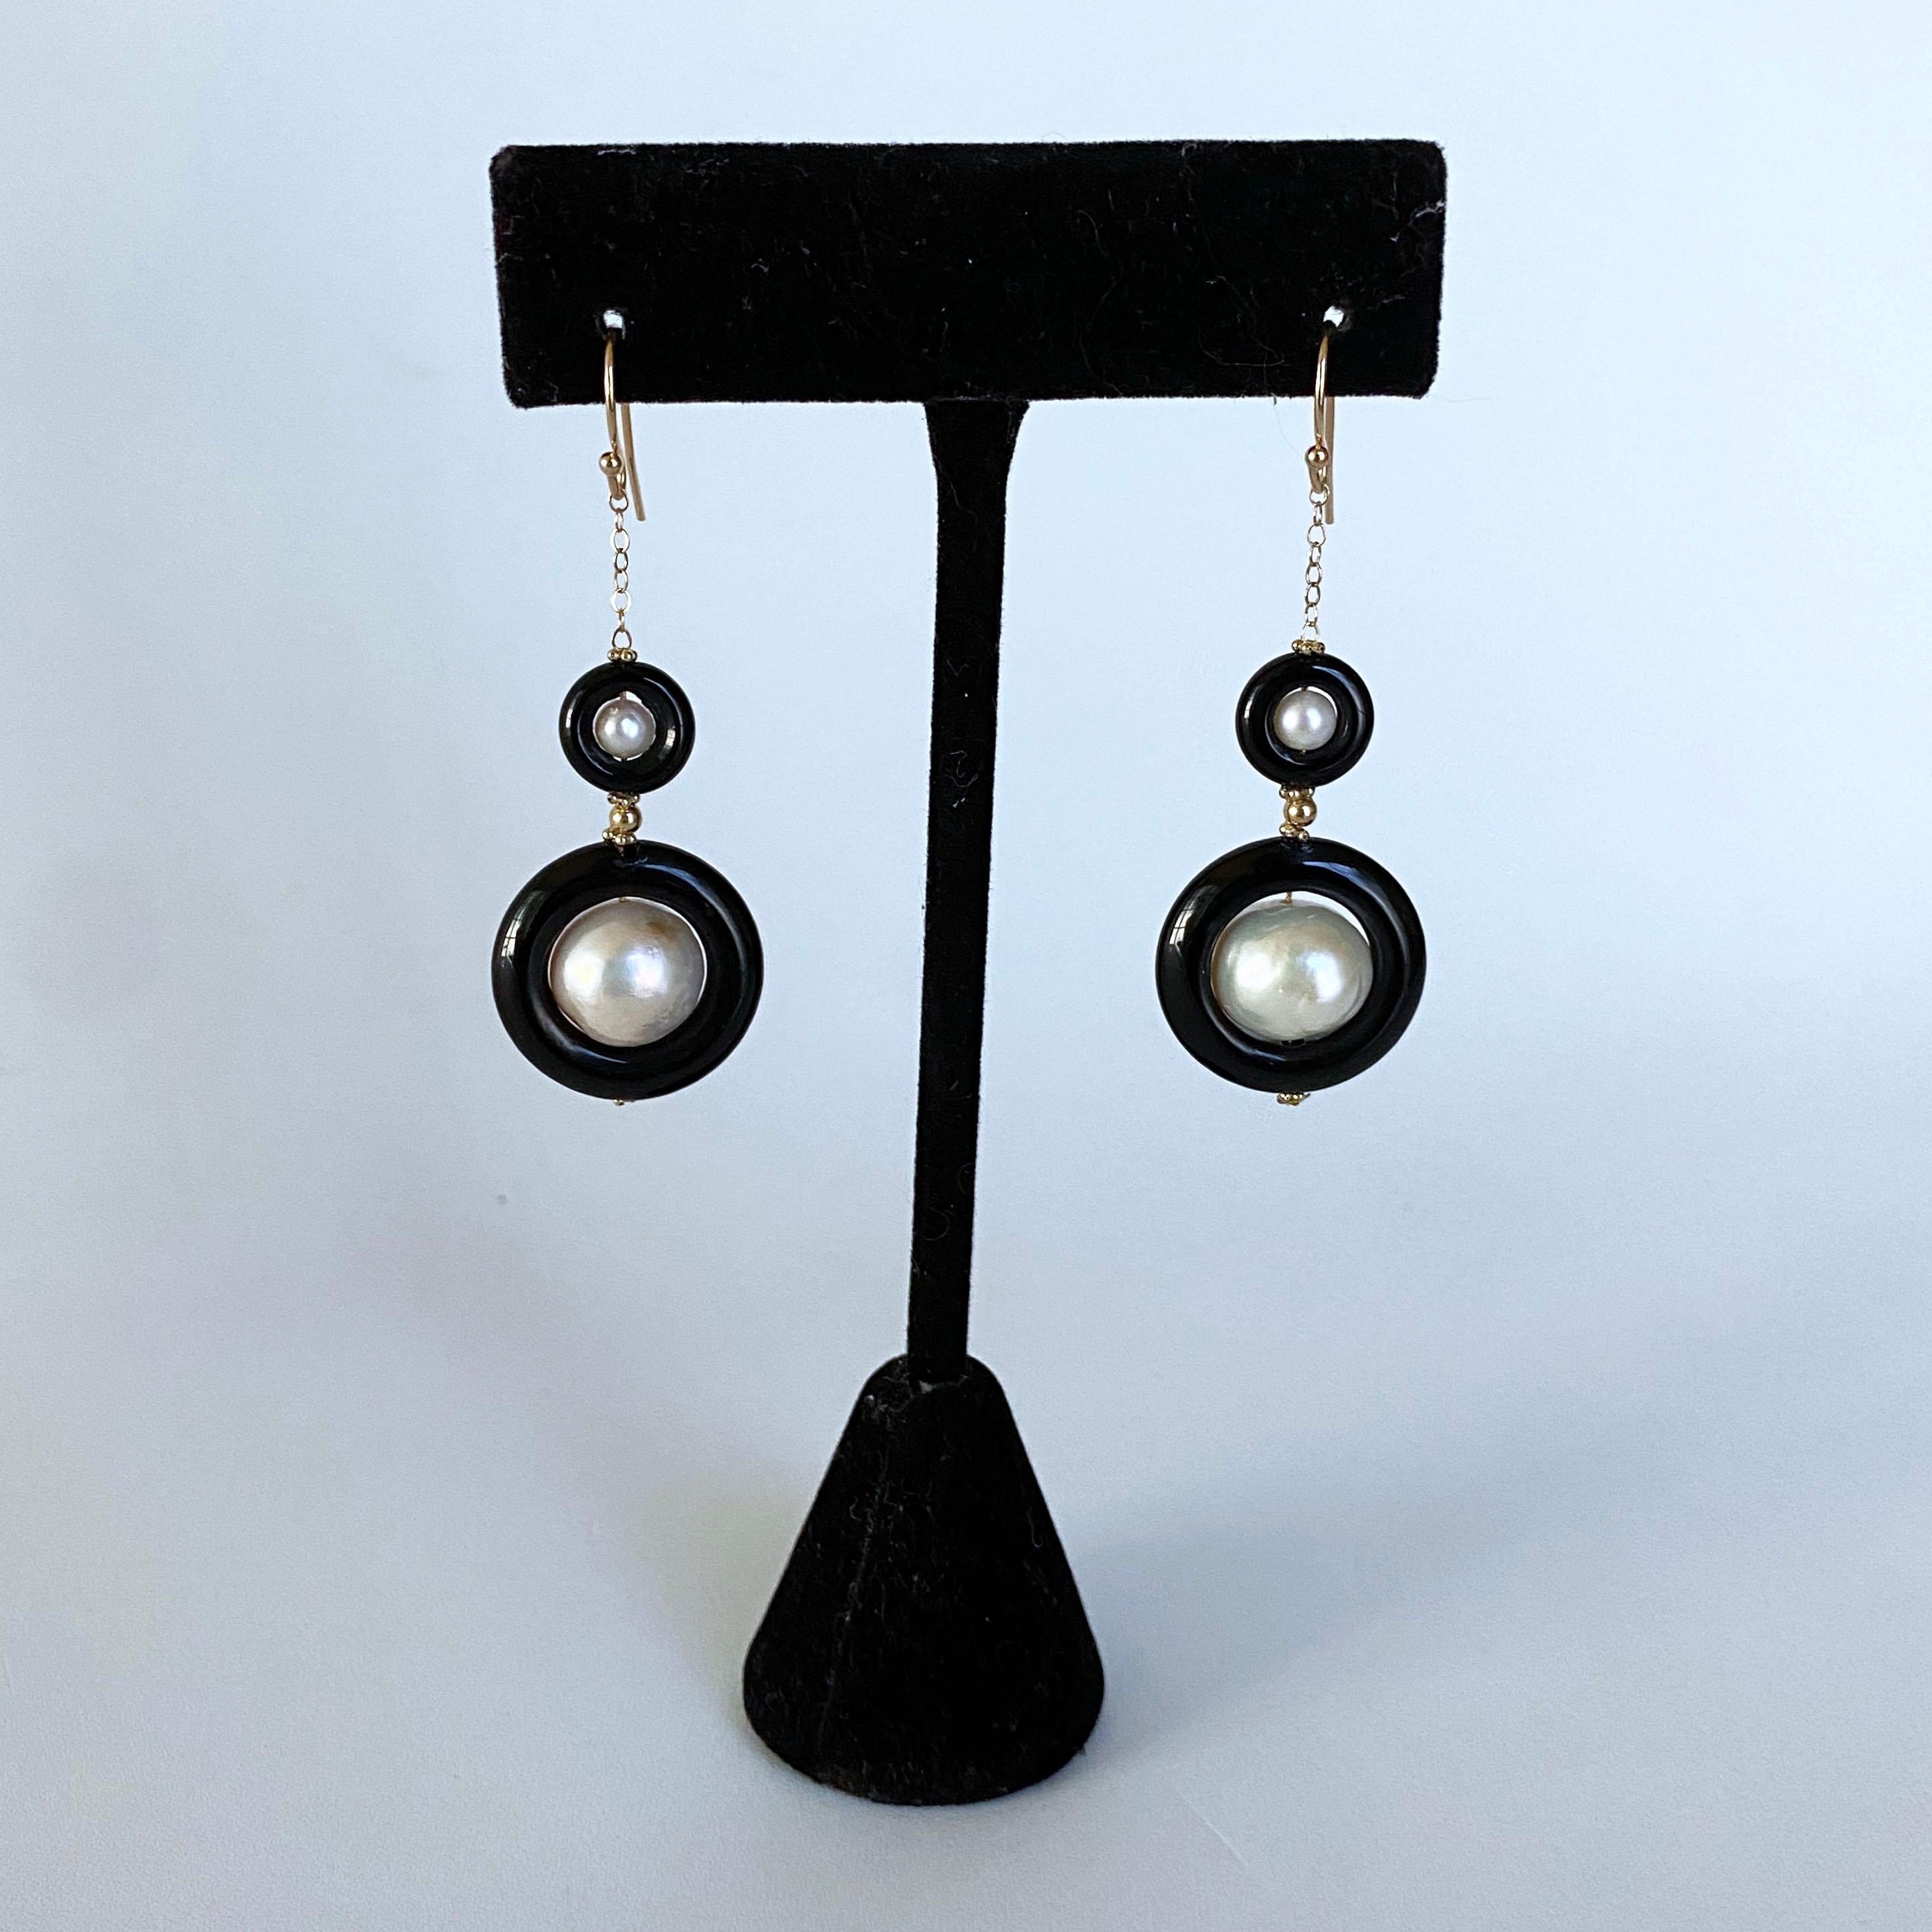 Stunning pair of Earrings by Marina J. This 2 tier Pearl and Black Onyx set features white Pearls displaying a beautiful iridescent sheen and texture, sitting inside Black Onyx donuts. The Pearl and Black Onyx Graduate in size and are separated by